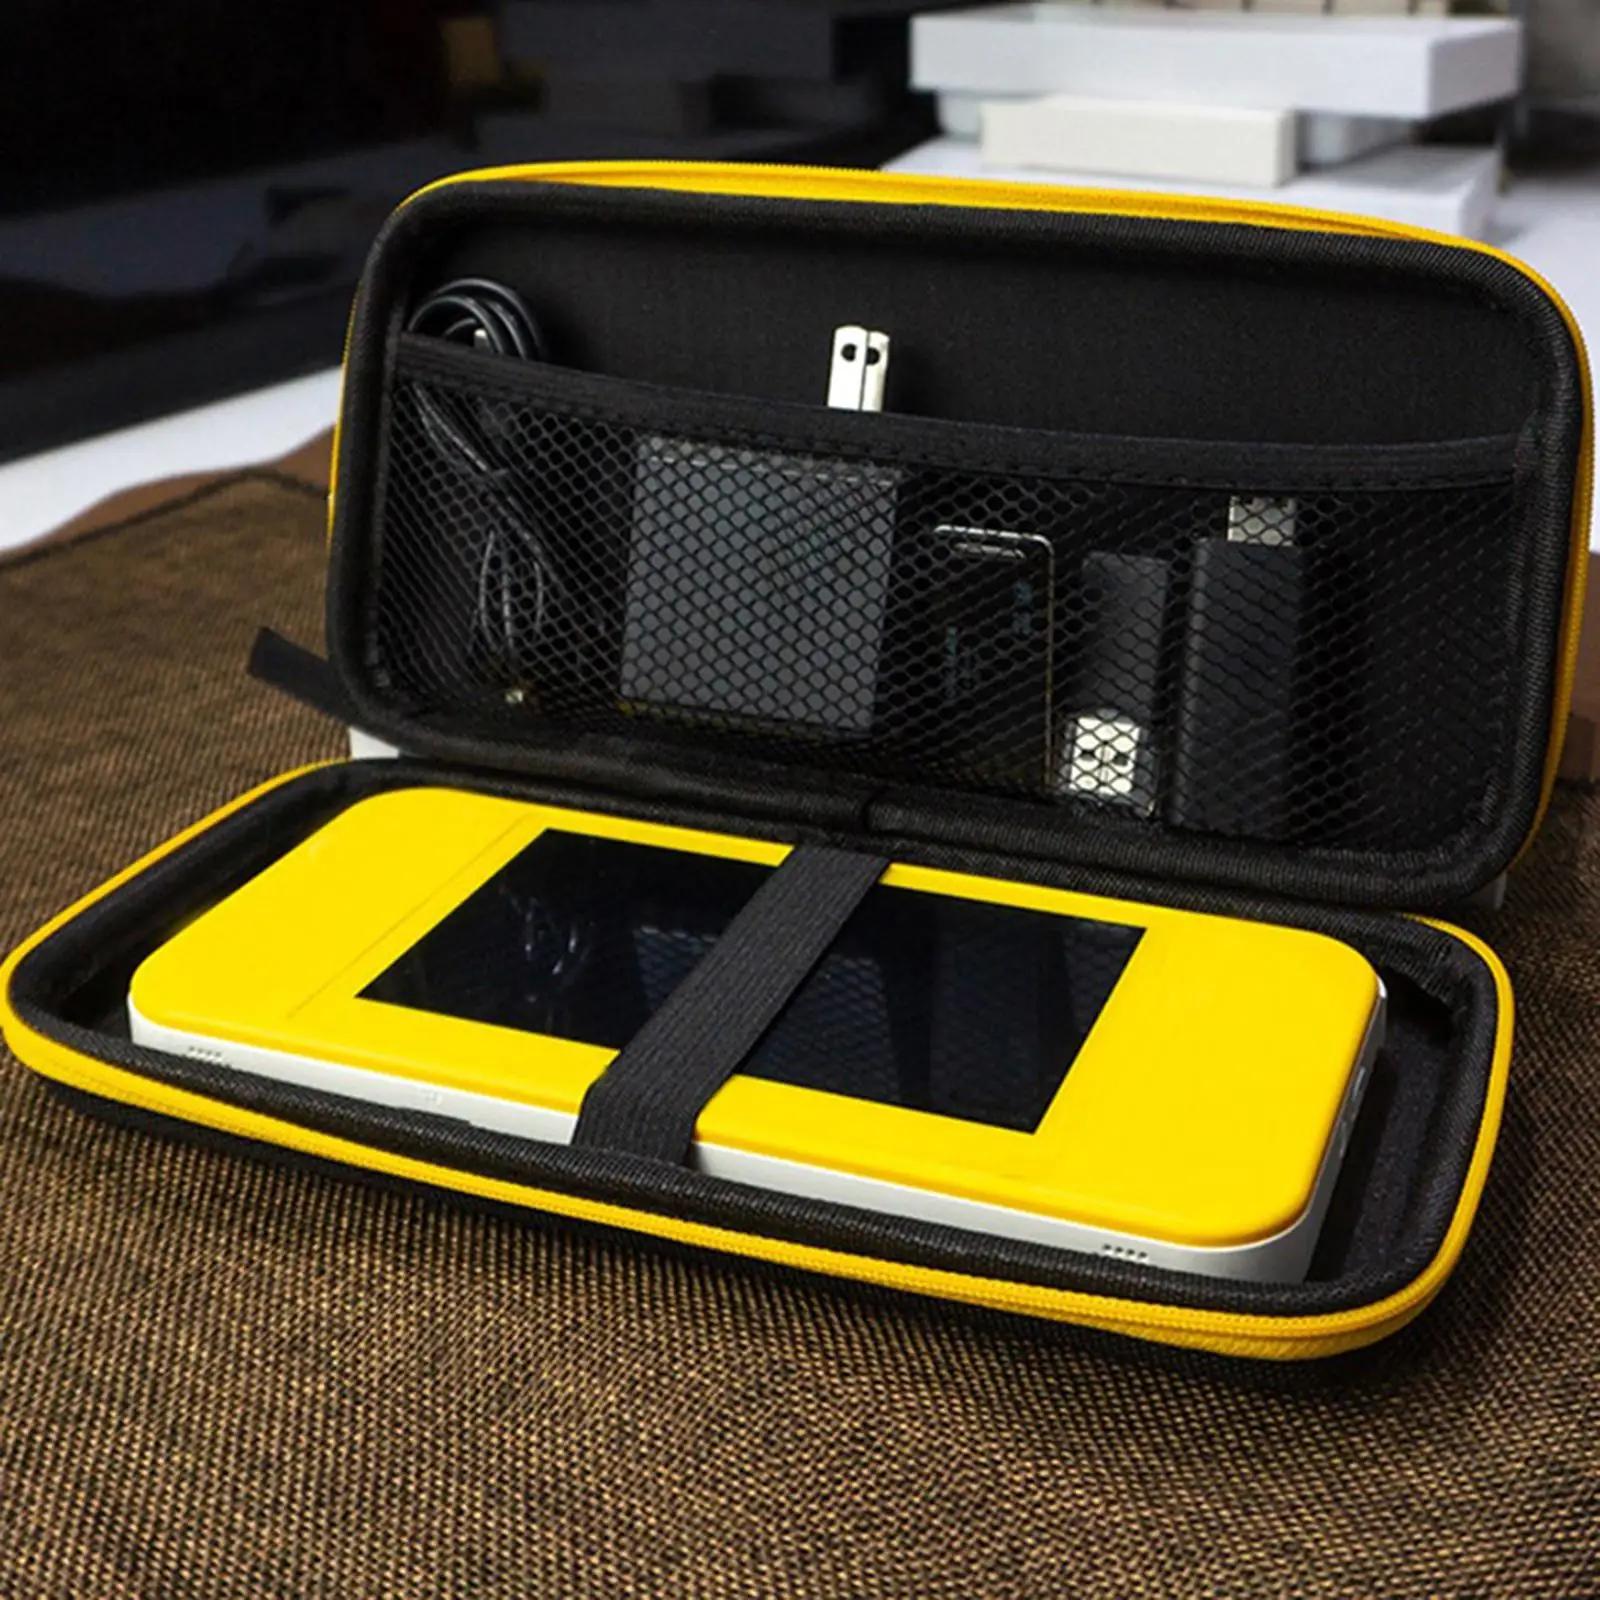 Shockproof Carrying Case Impact Resistant Screen Protect Suitcase Bag Zipper Portable Hard Shell Pouch Accessories for Pocket 3